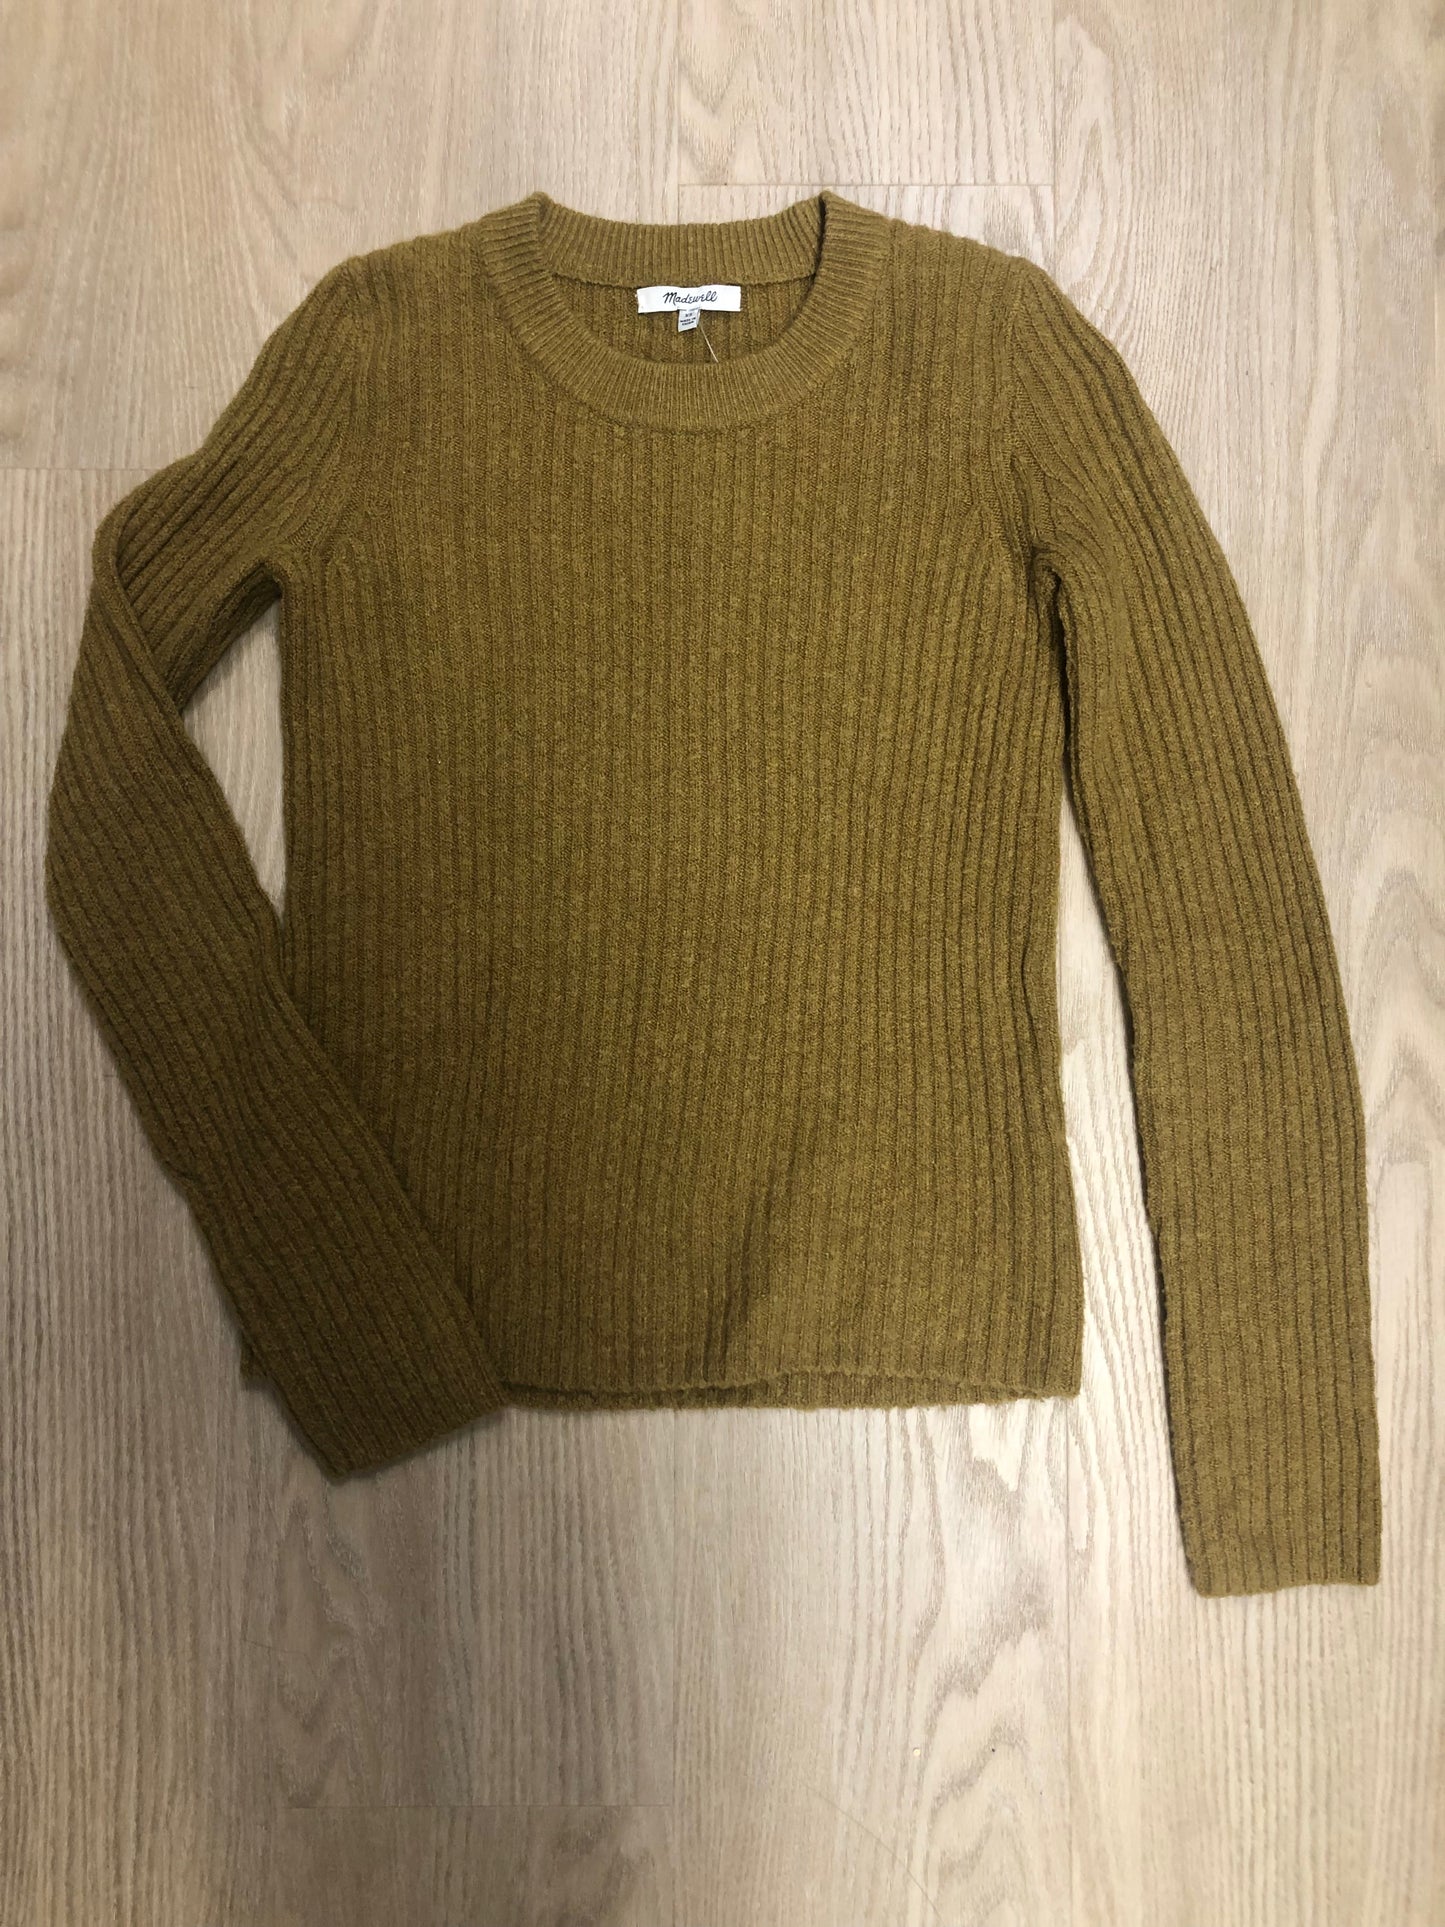 Madewell Adult xs Chartreuse Sweater